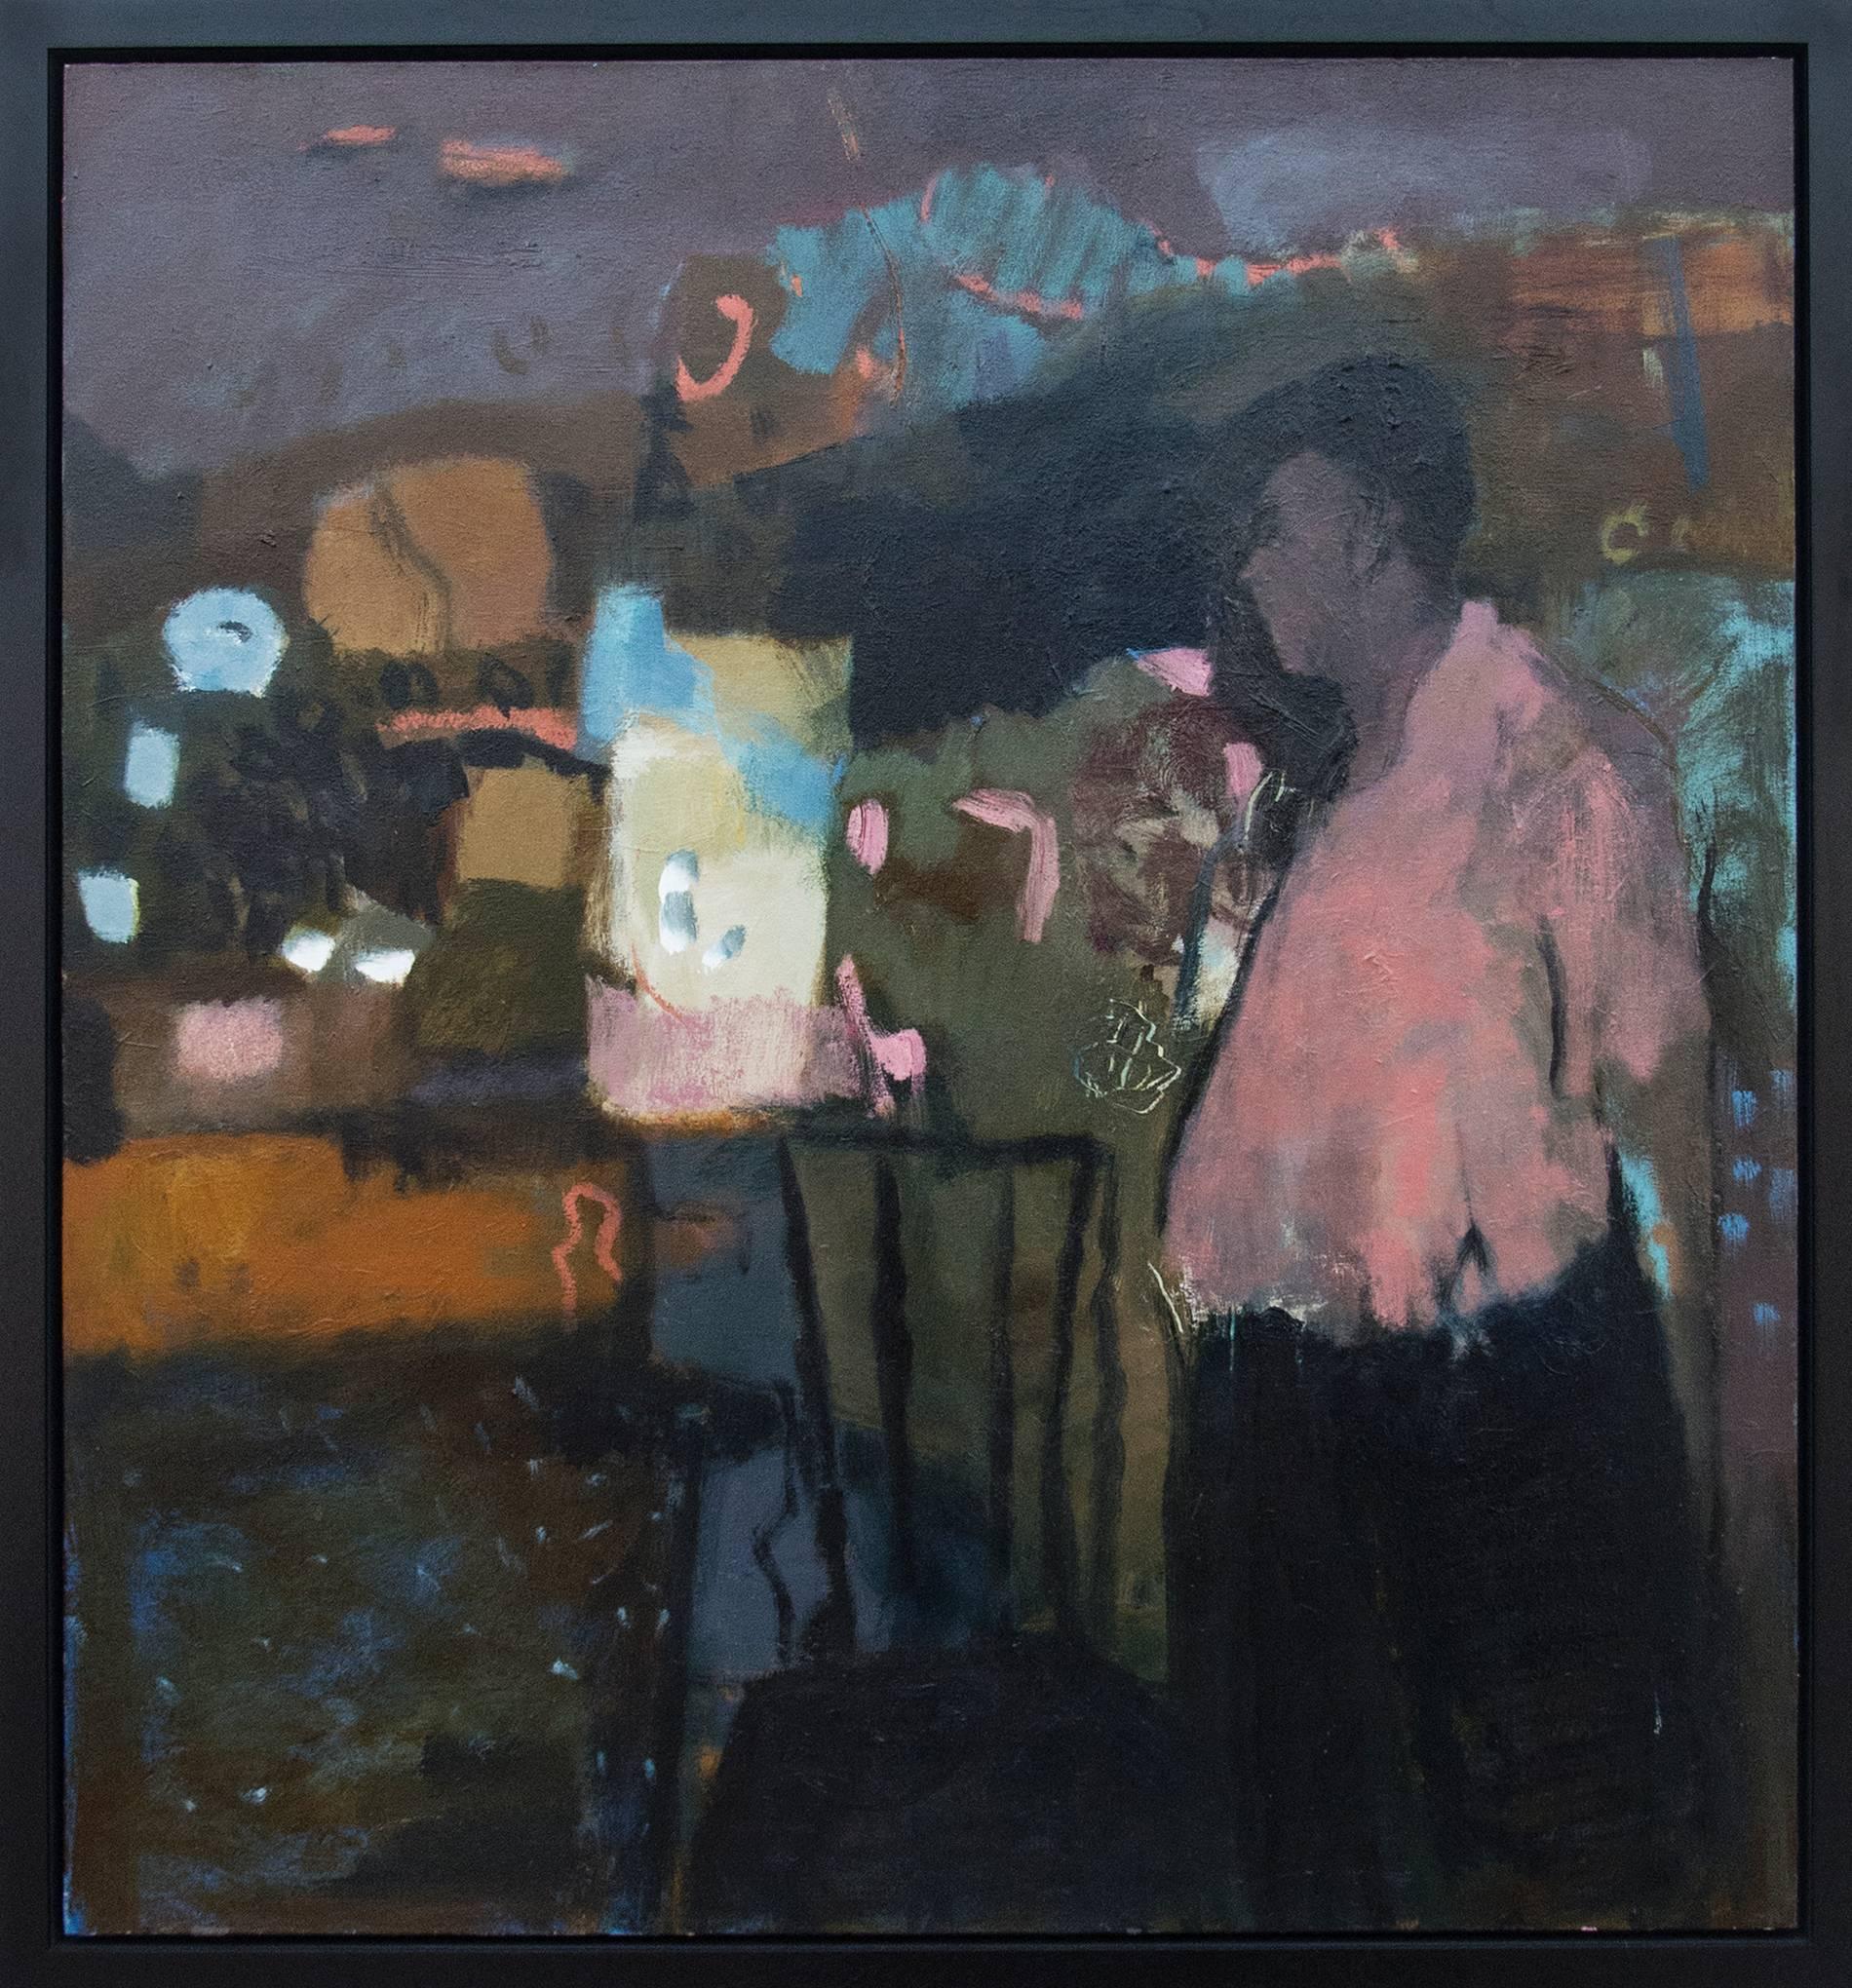 Man With Pink Shirt - large abstracted male portrait figurative still life oil